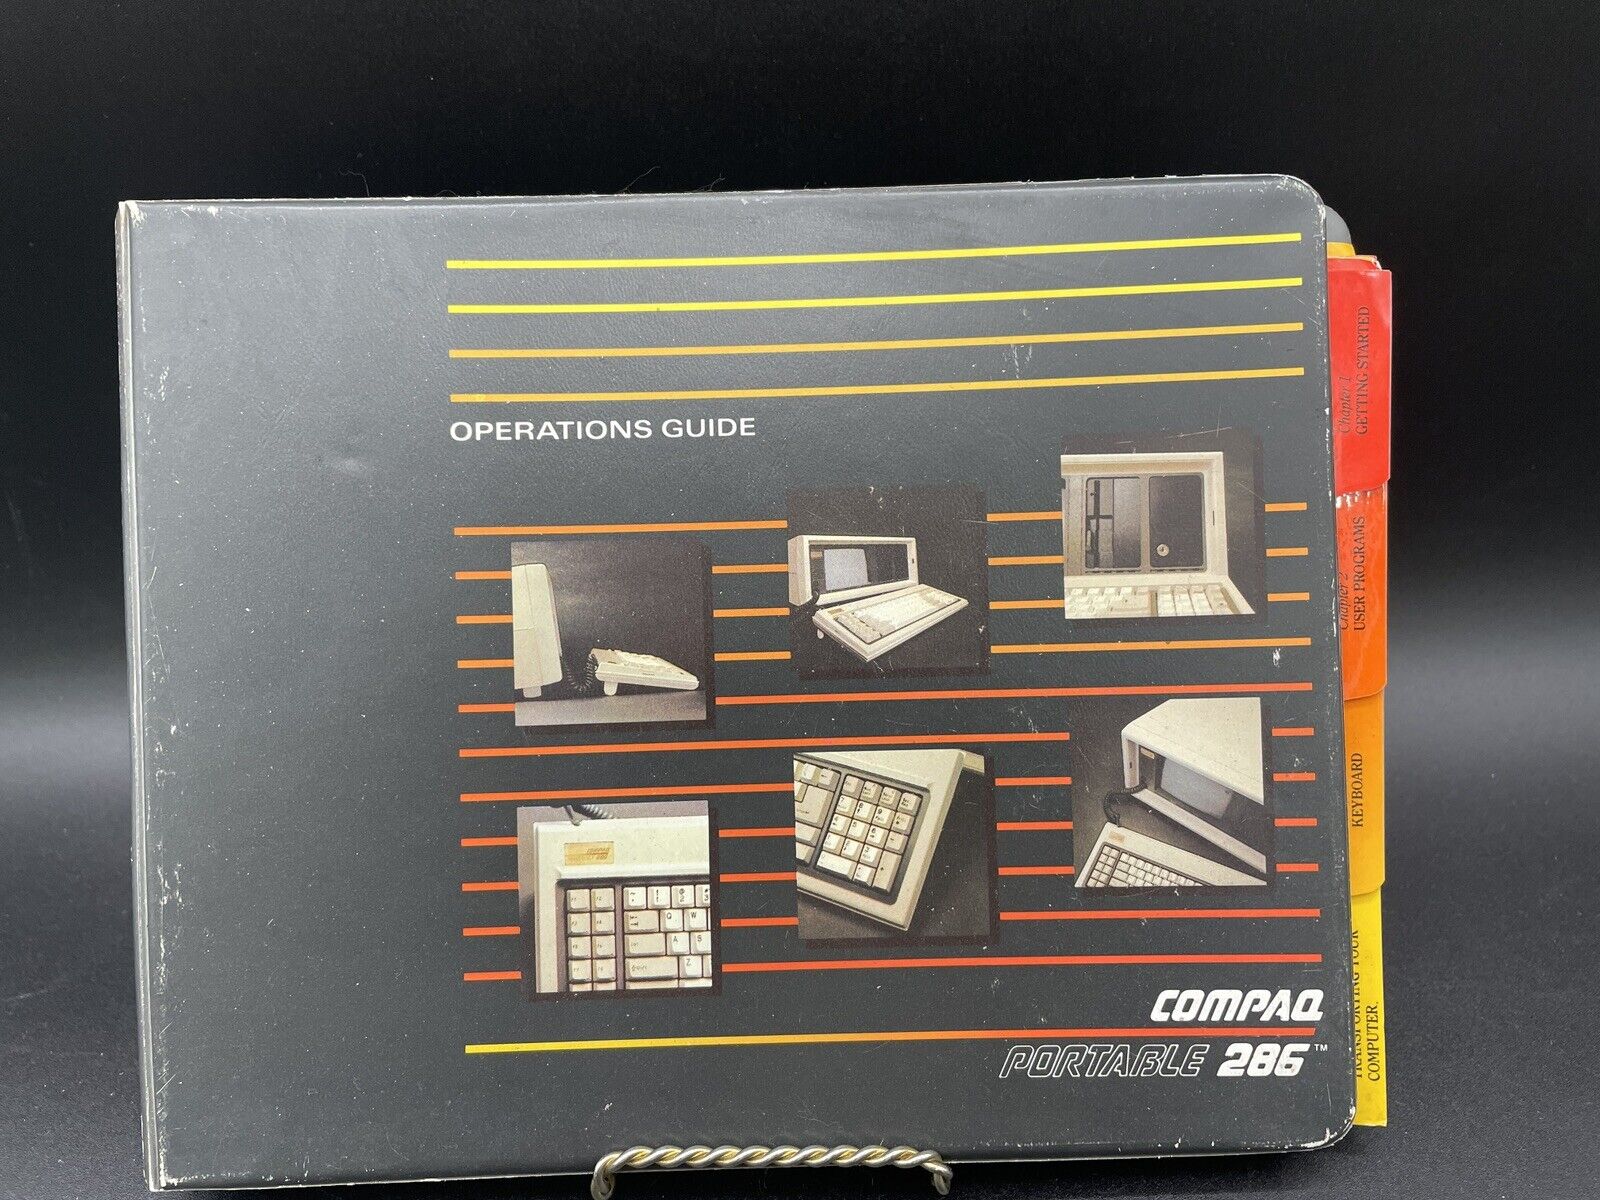 Vintage 1985 compaq portable 286 personal computer operations guide first Ed.